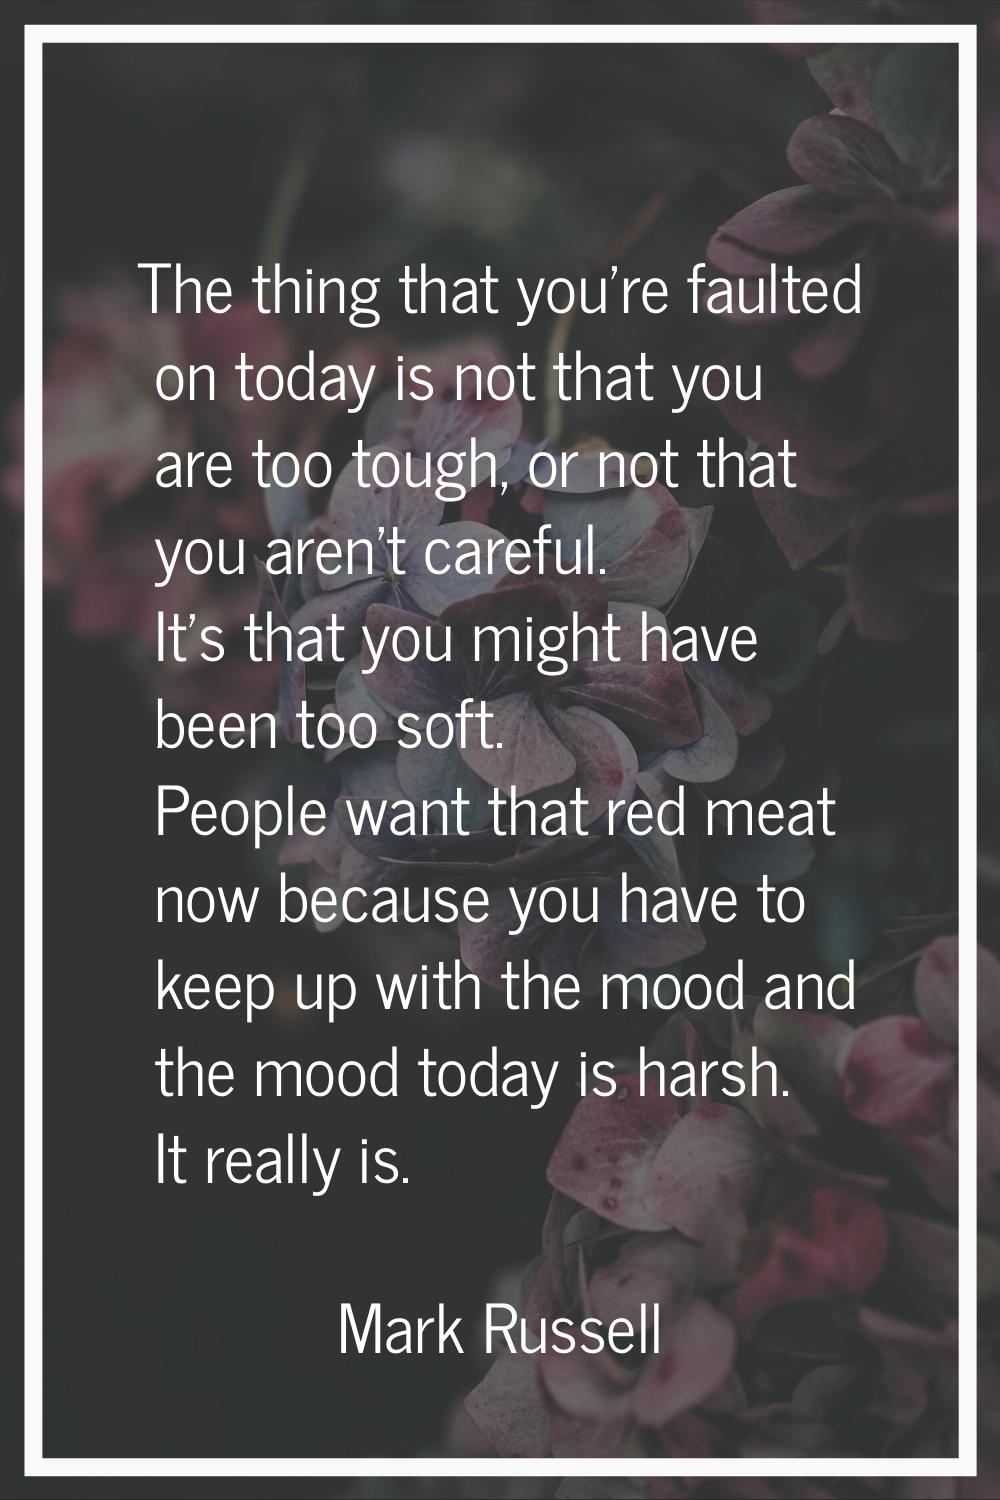 The thing that you're faulted on today is not that you are too tough, or not that you aren't carefu